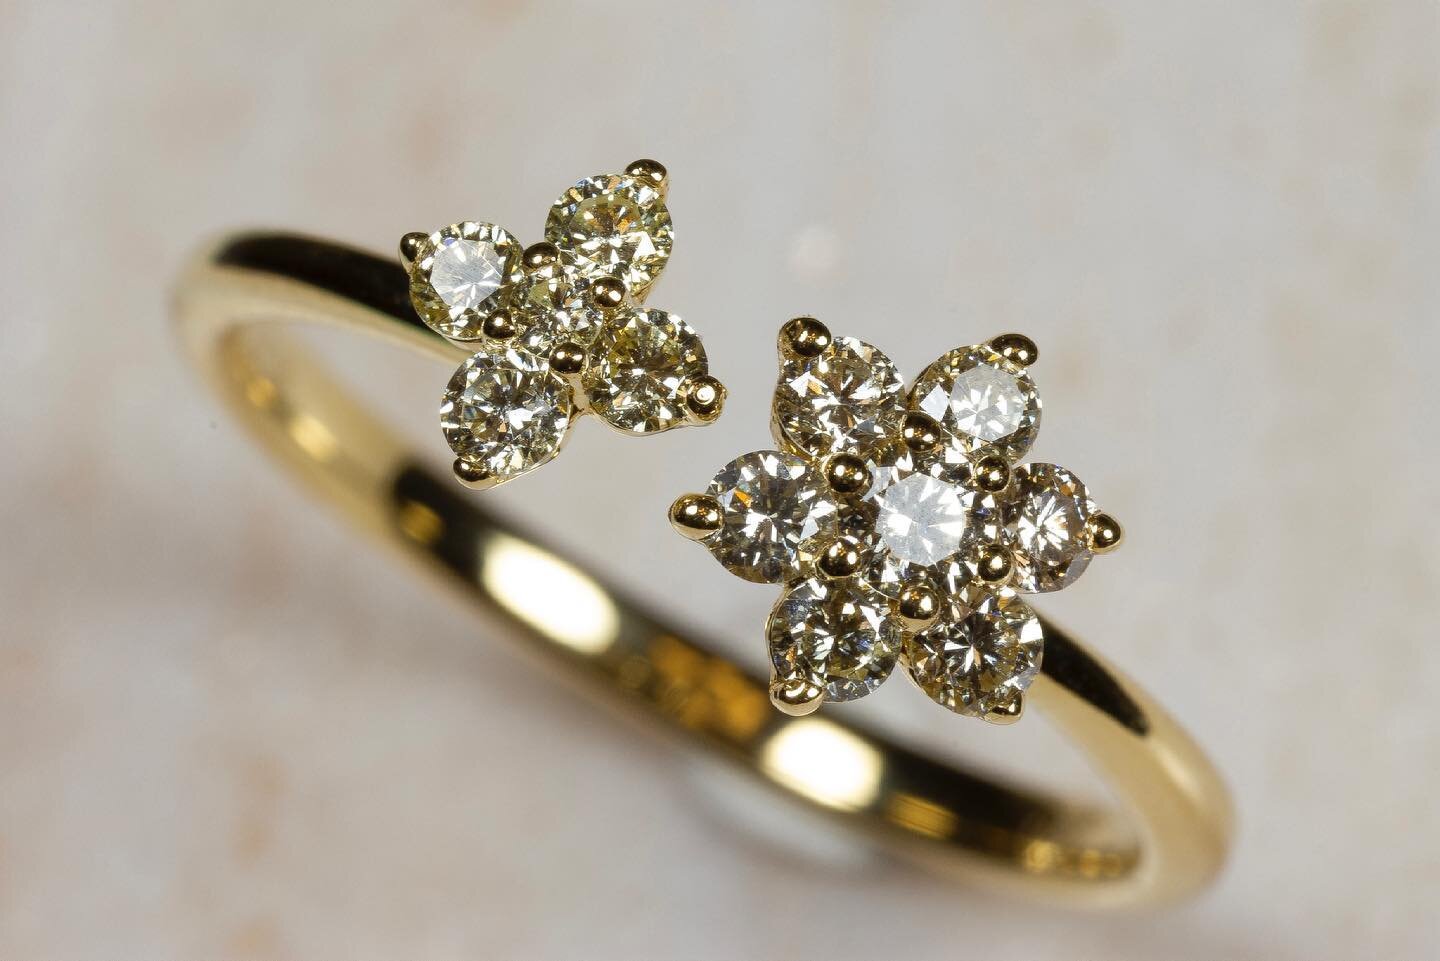 Tiny Floral Ring

This contemporary ring is as beautiful as its dynamic. A sophisticated split ring design set with 12 brilliant cut round diamonds in a flower shape. Available in 18K White, Yellow and Rose Gold.

🔗Shop now on www.nicolojewelry.com